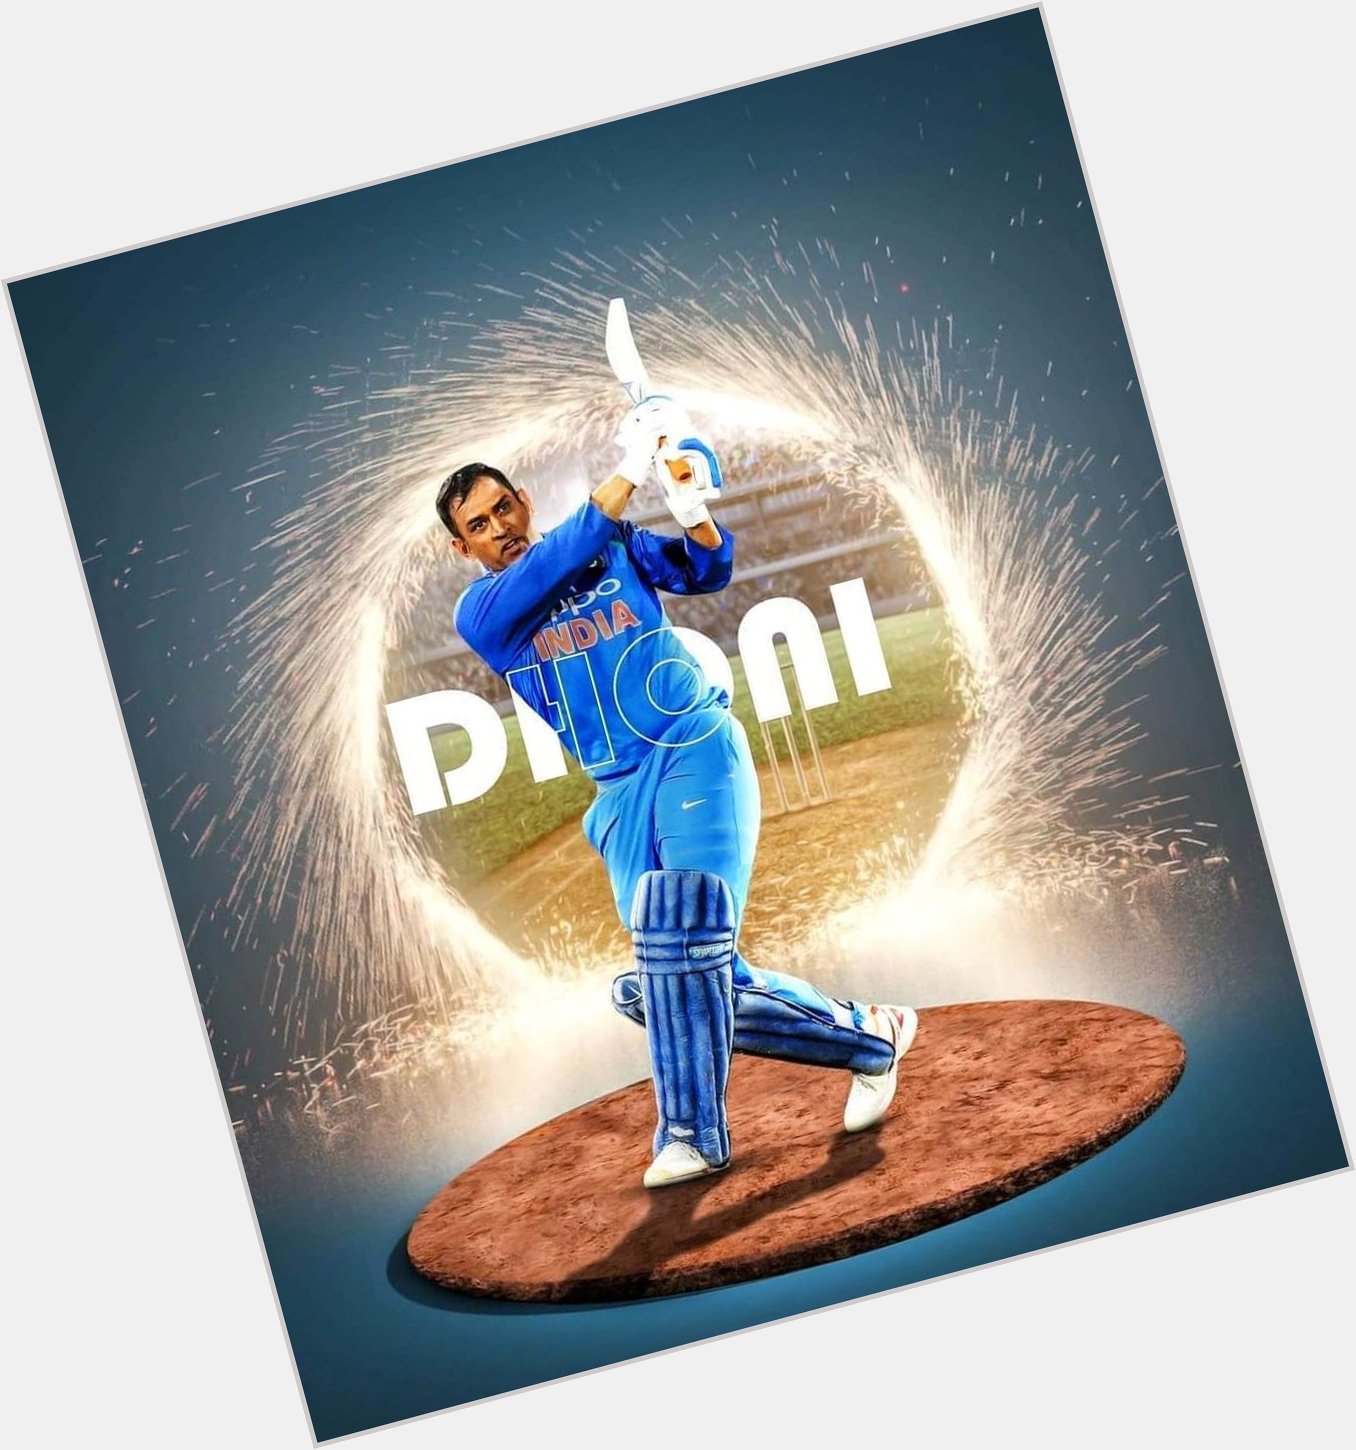 Happy birthday Mahendra Singh Dhoni sir.
only captain in the history of Cricket to win all ICC trophies. 